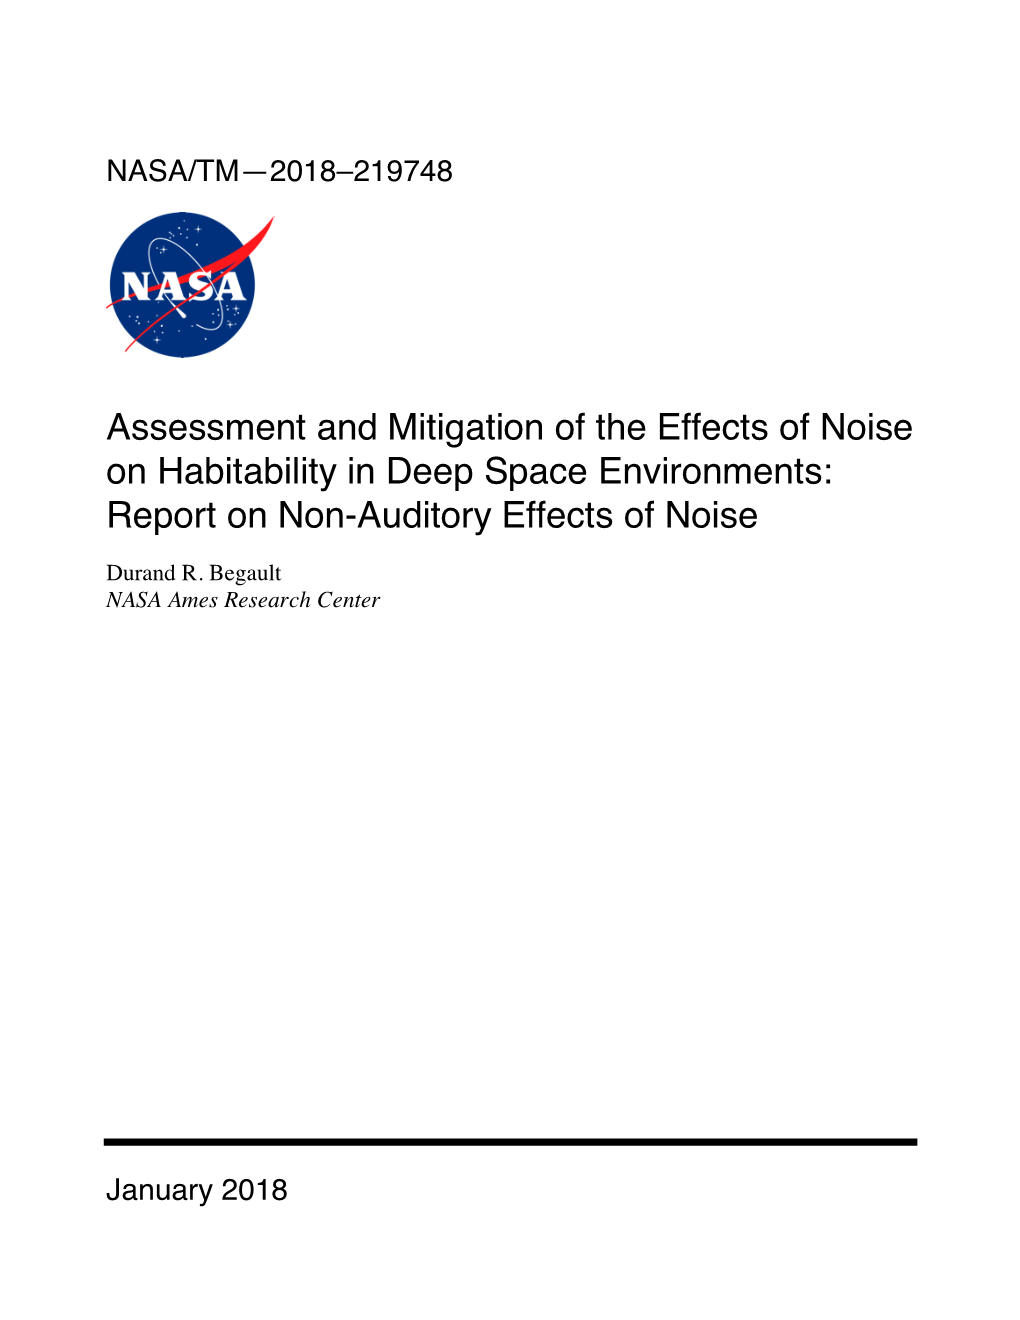 Assessment and Mitigation of the Effects of Noise on Habitability in Deep Space Environments: Report on Non-Auditory Effects of Noise